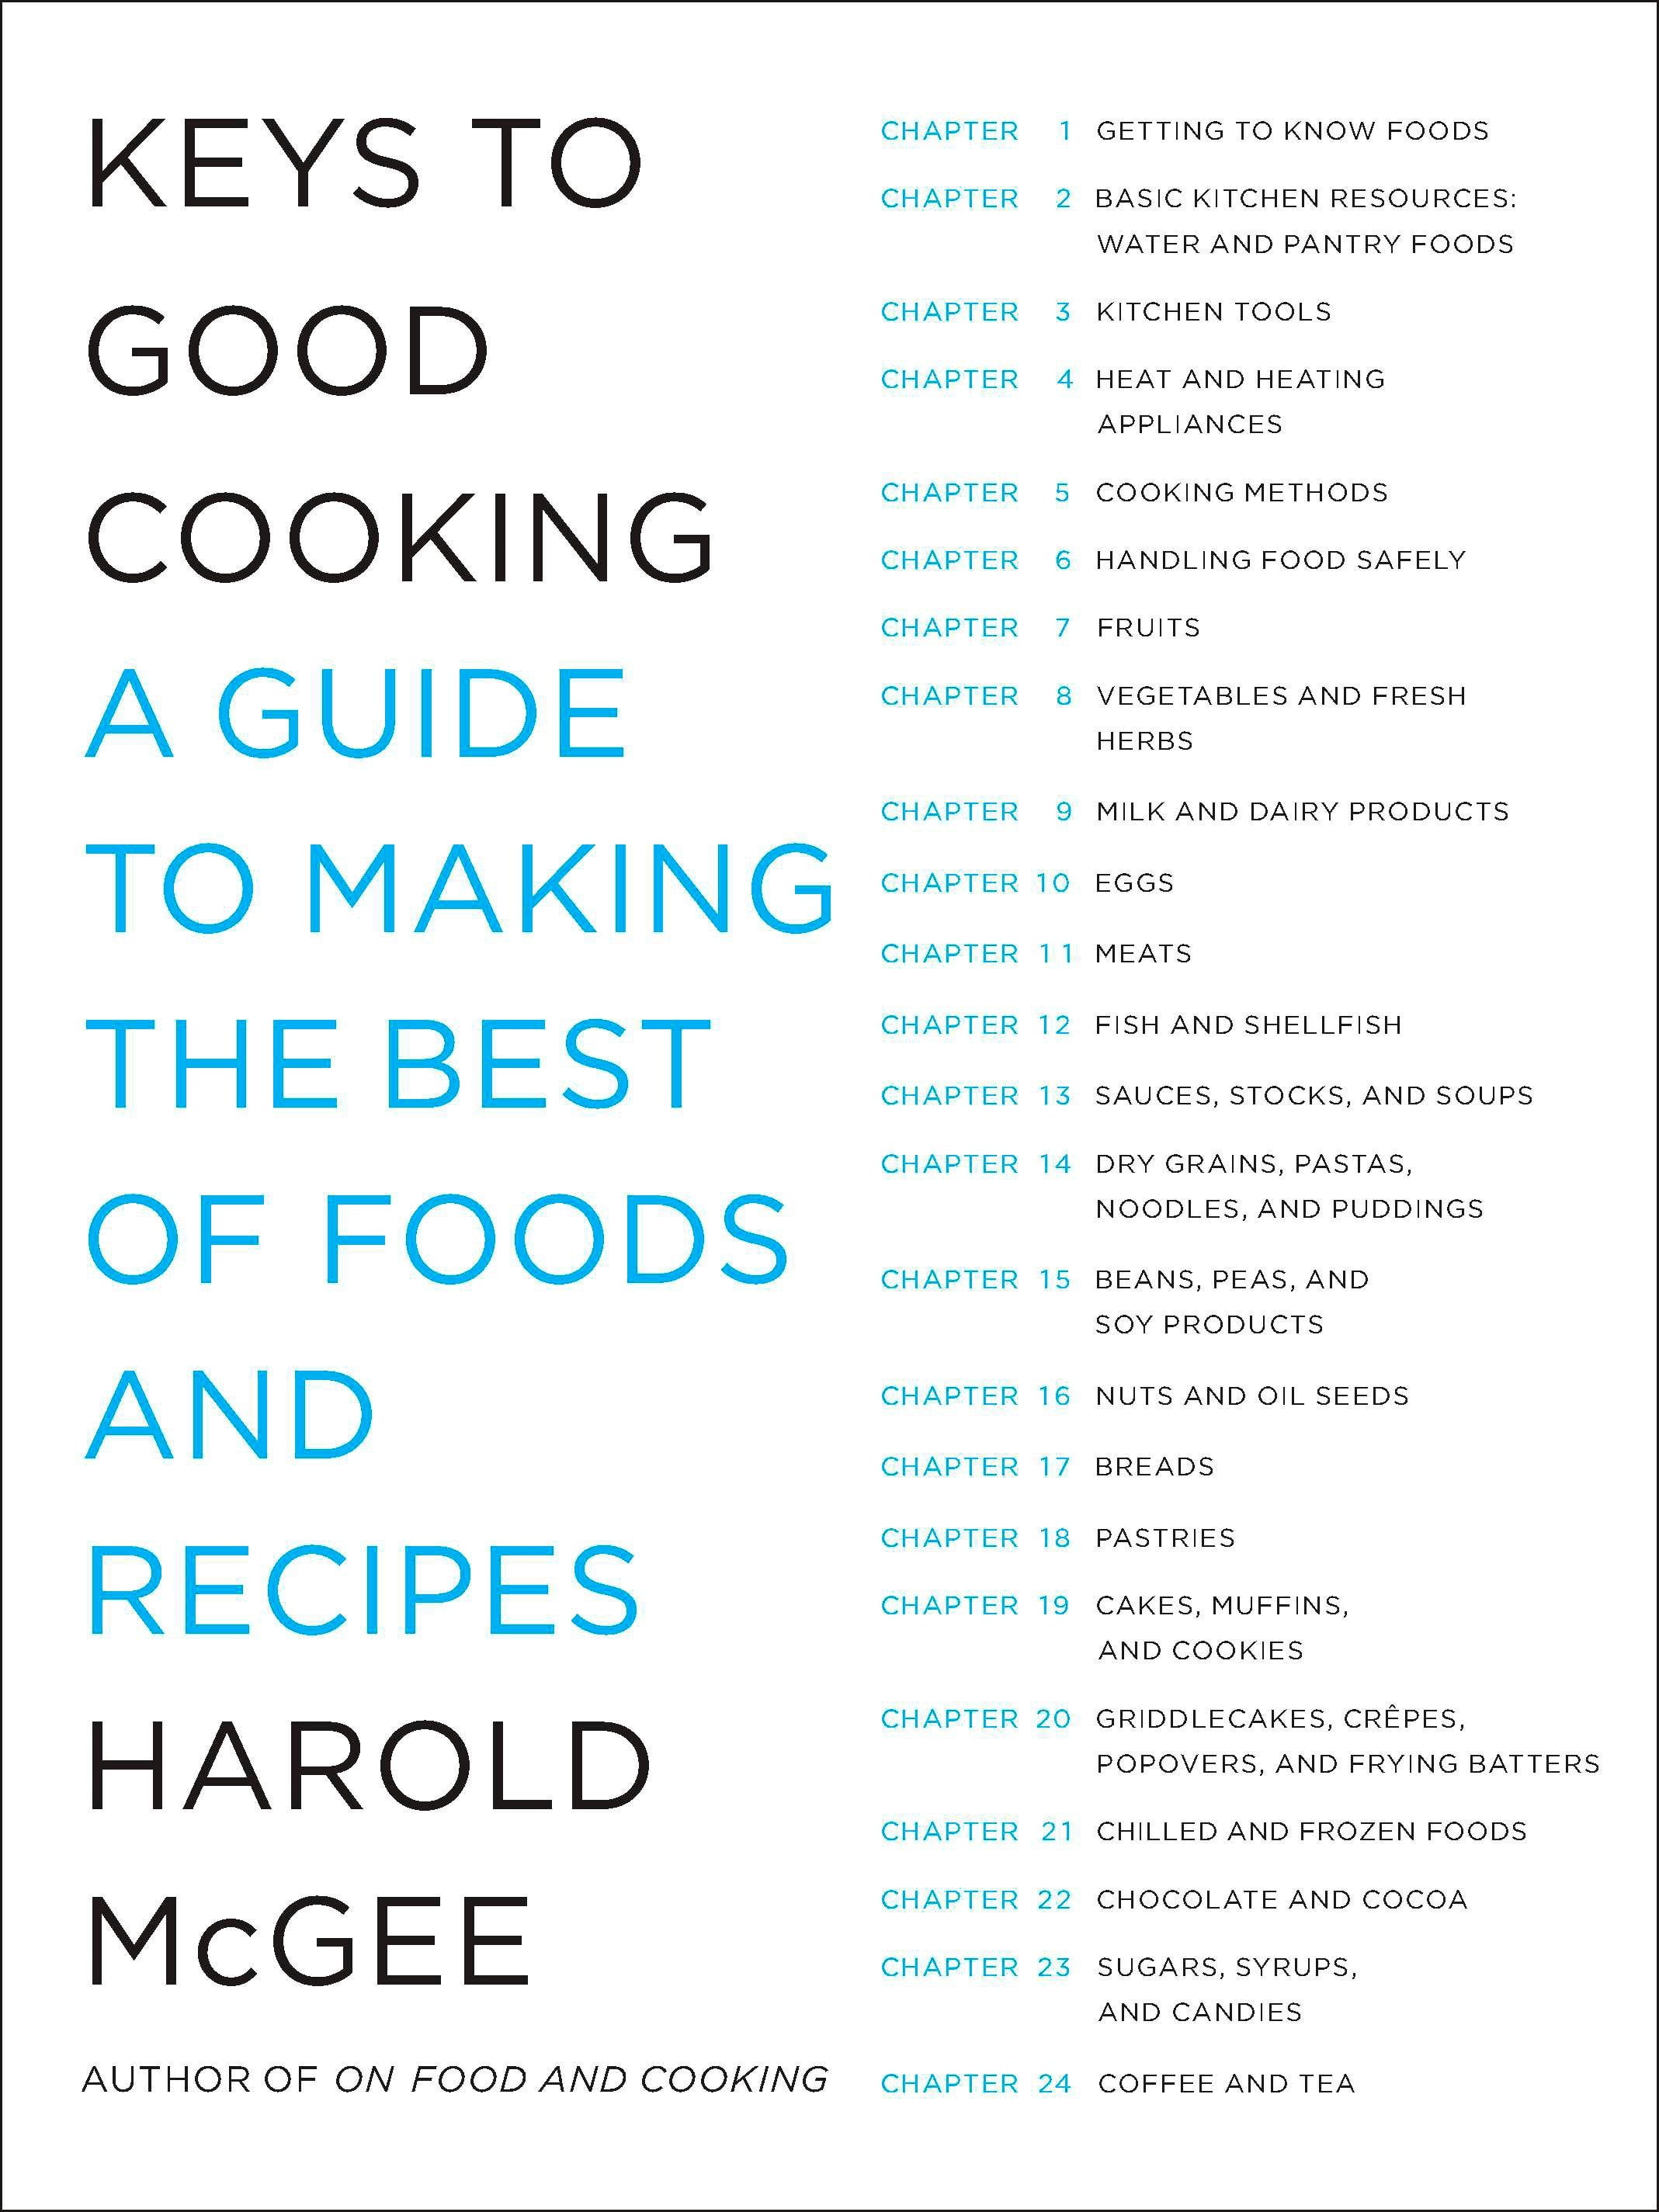 To cook good well. MCGEE on food and Cooking. On food and Cooking Harold MCGEE. Гарольд МАКГИ. Food Cook Magee.